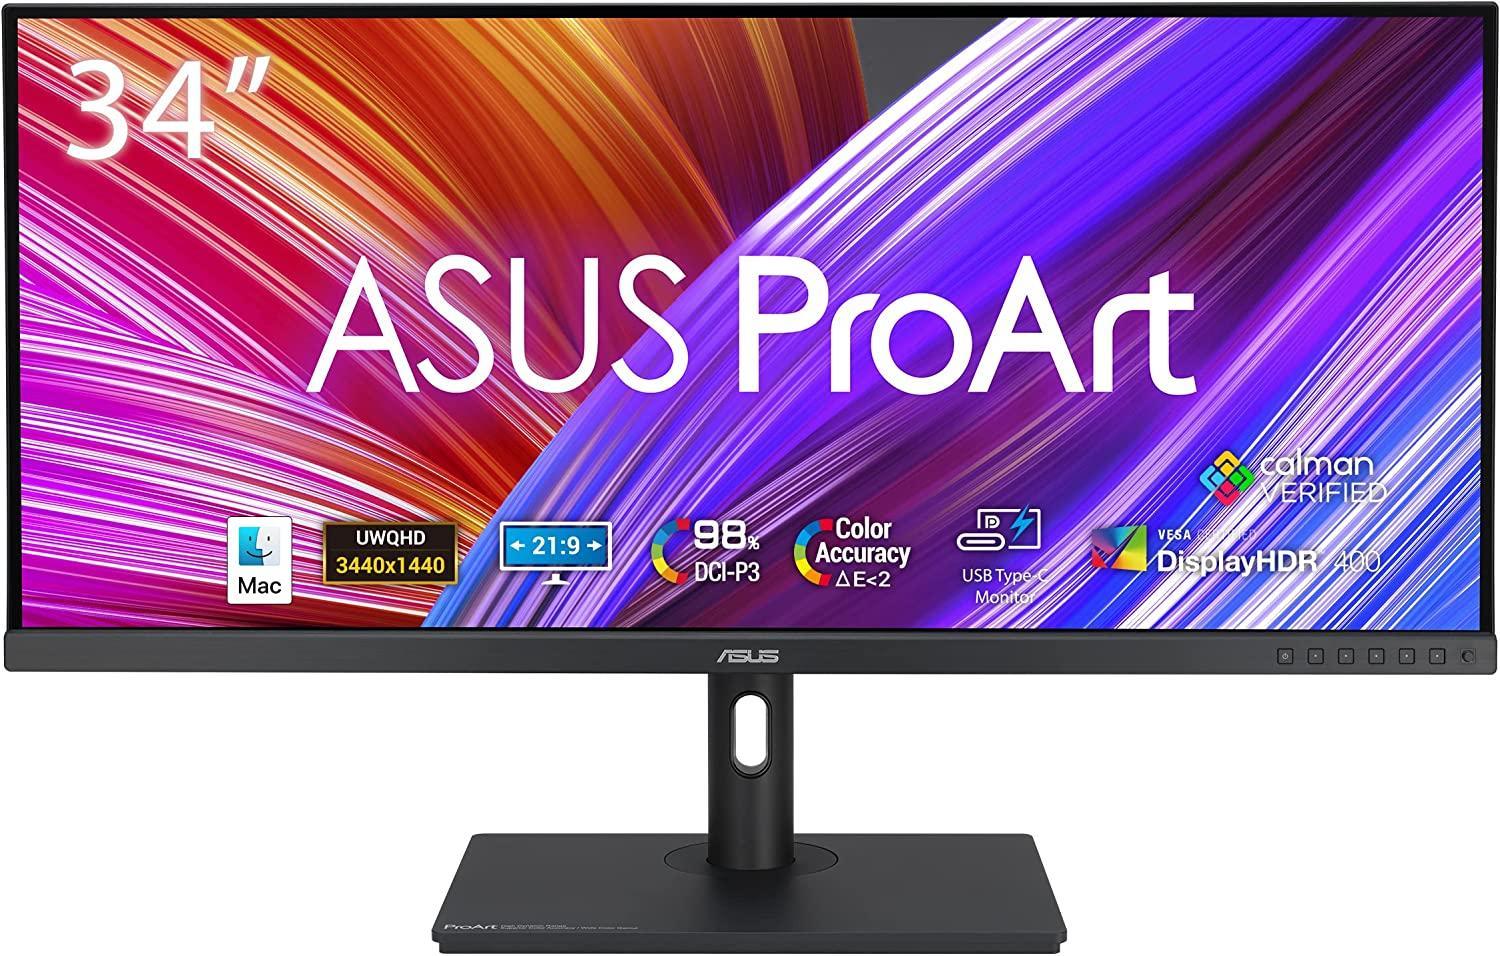 ASUS ProArt Display 34” Computer Monitor (PA348CGV) - 21:9 Ultra-Wide QHD (3440 x 1440), IPS, Color Accuracy ΔE < 2, Calman Verified, 98% DCI-P3, USB-C, 120Hz, Compatible with Laptop & Mac Monitor